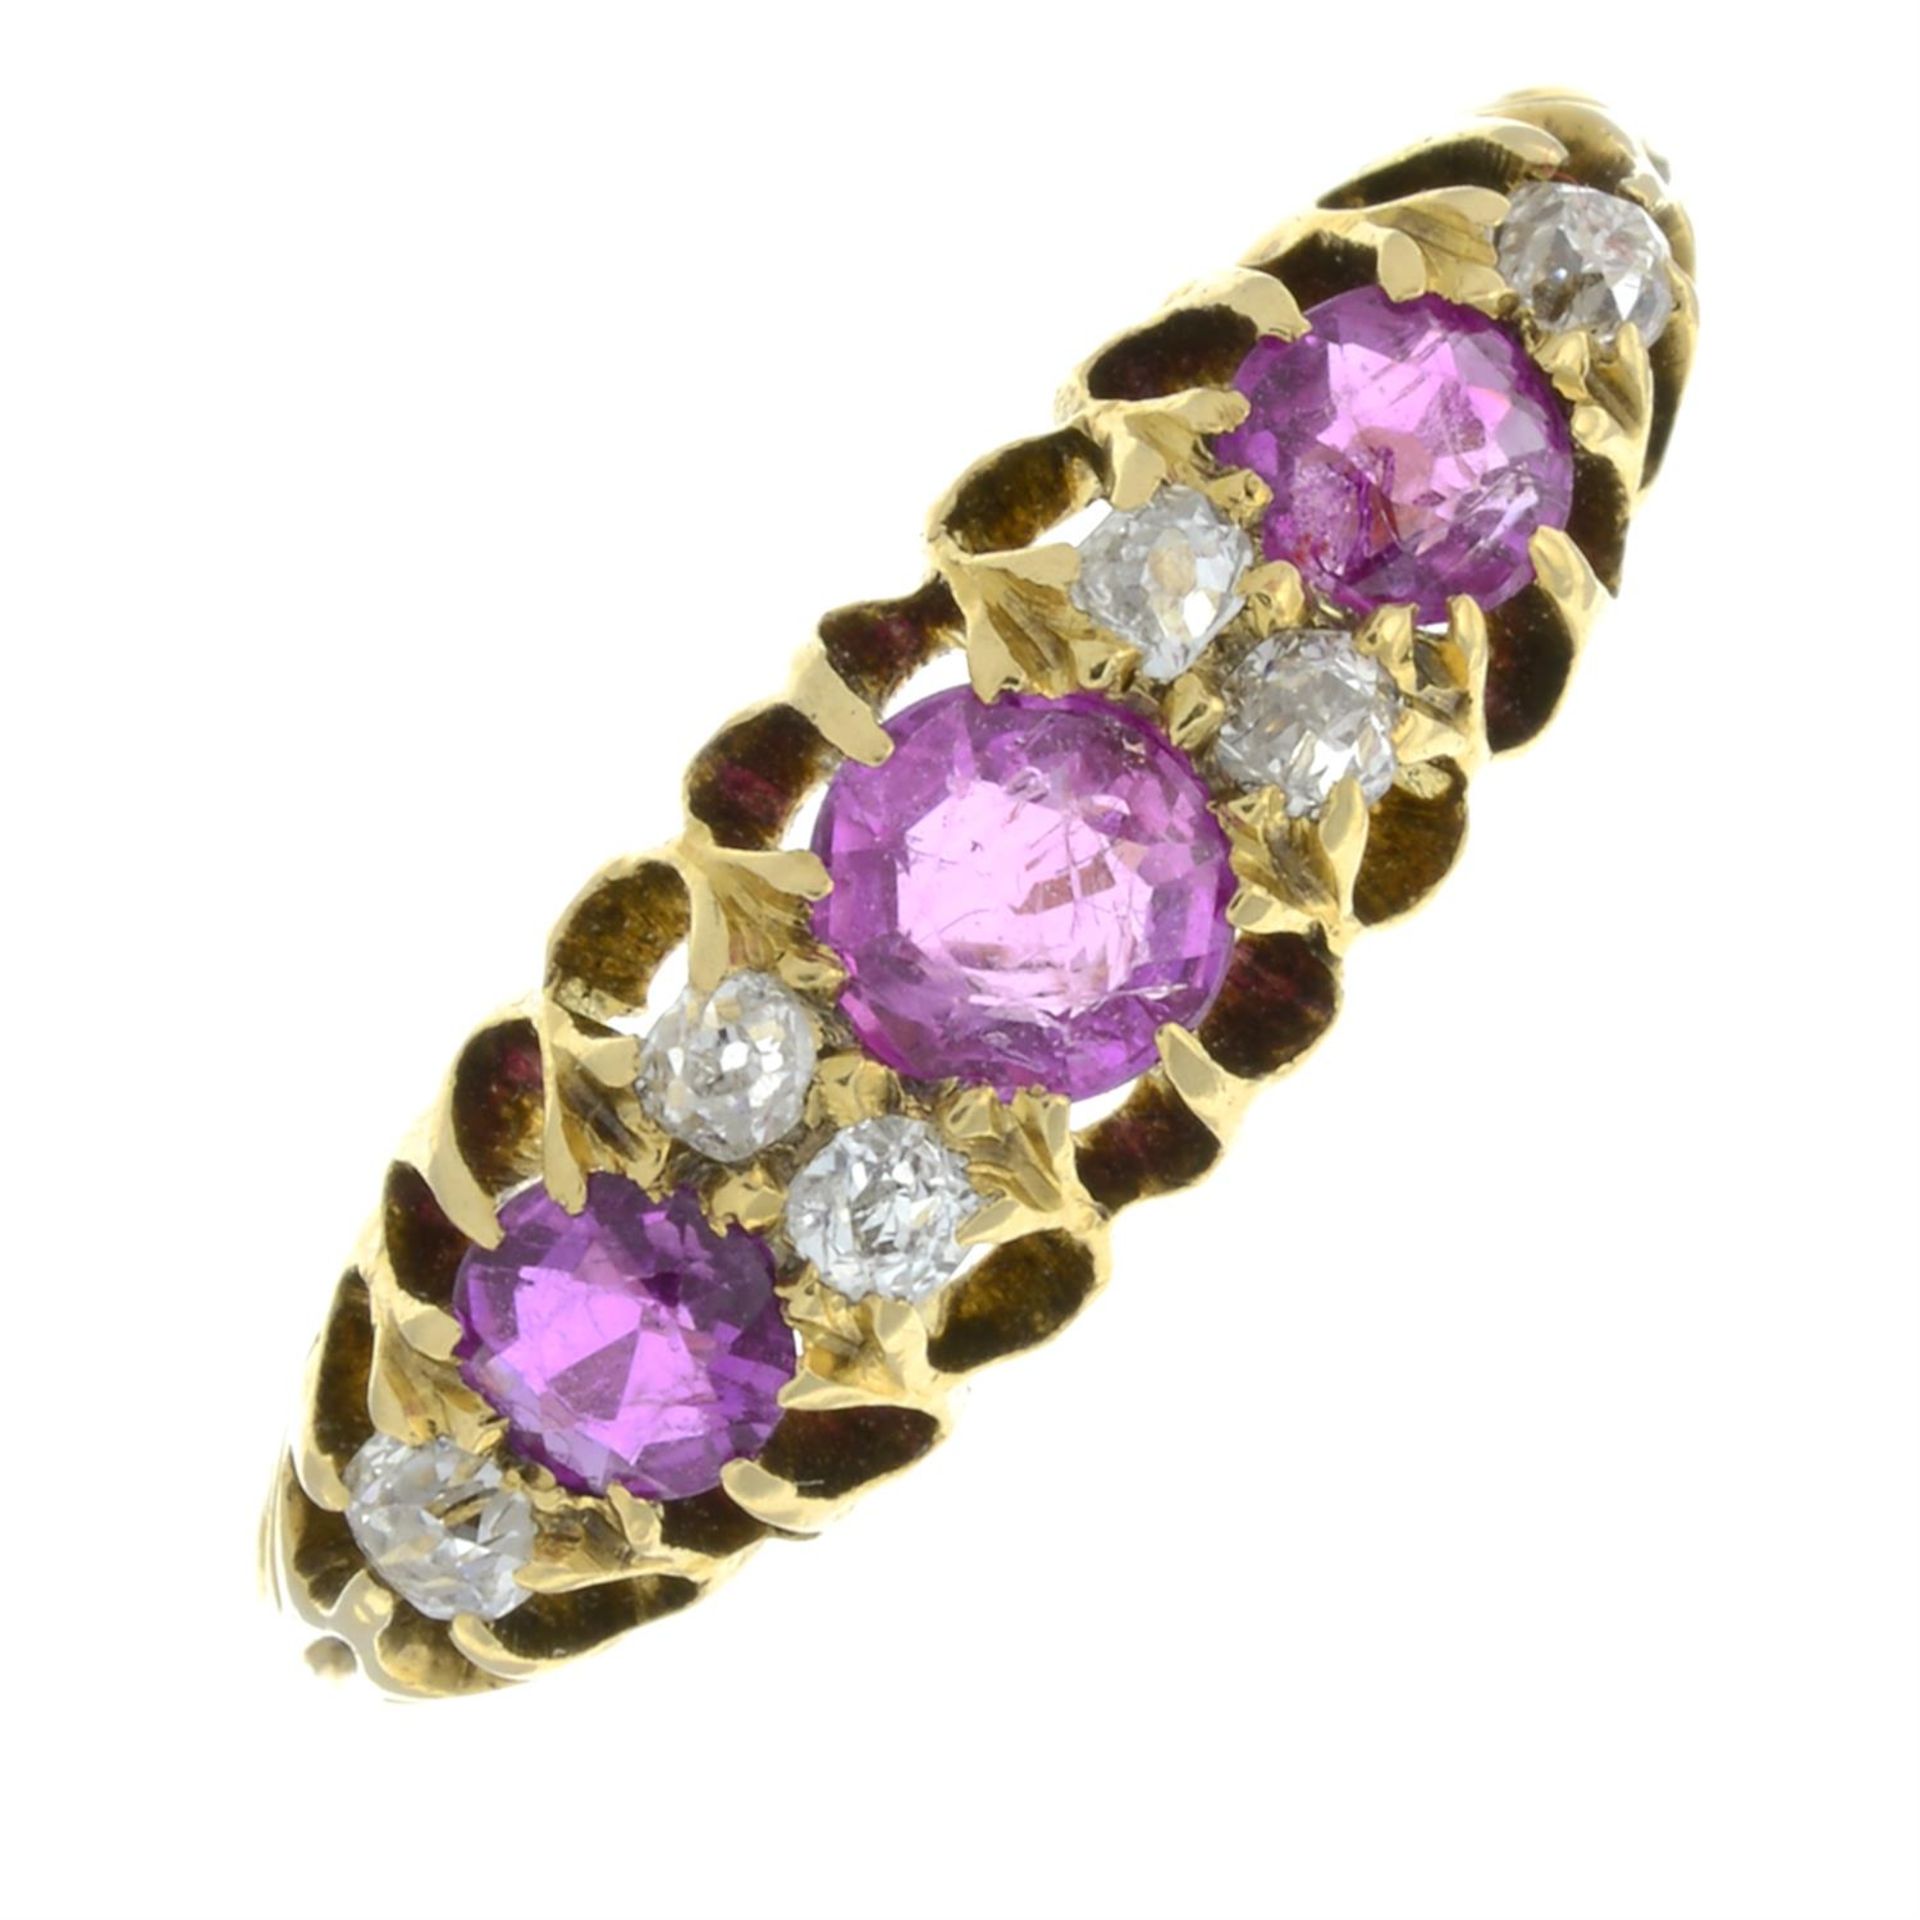 An early 20th century 18ct gold ruby three-stone ring, with old-cut diamond spacers.